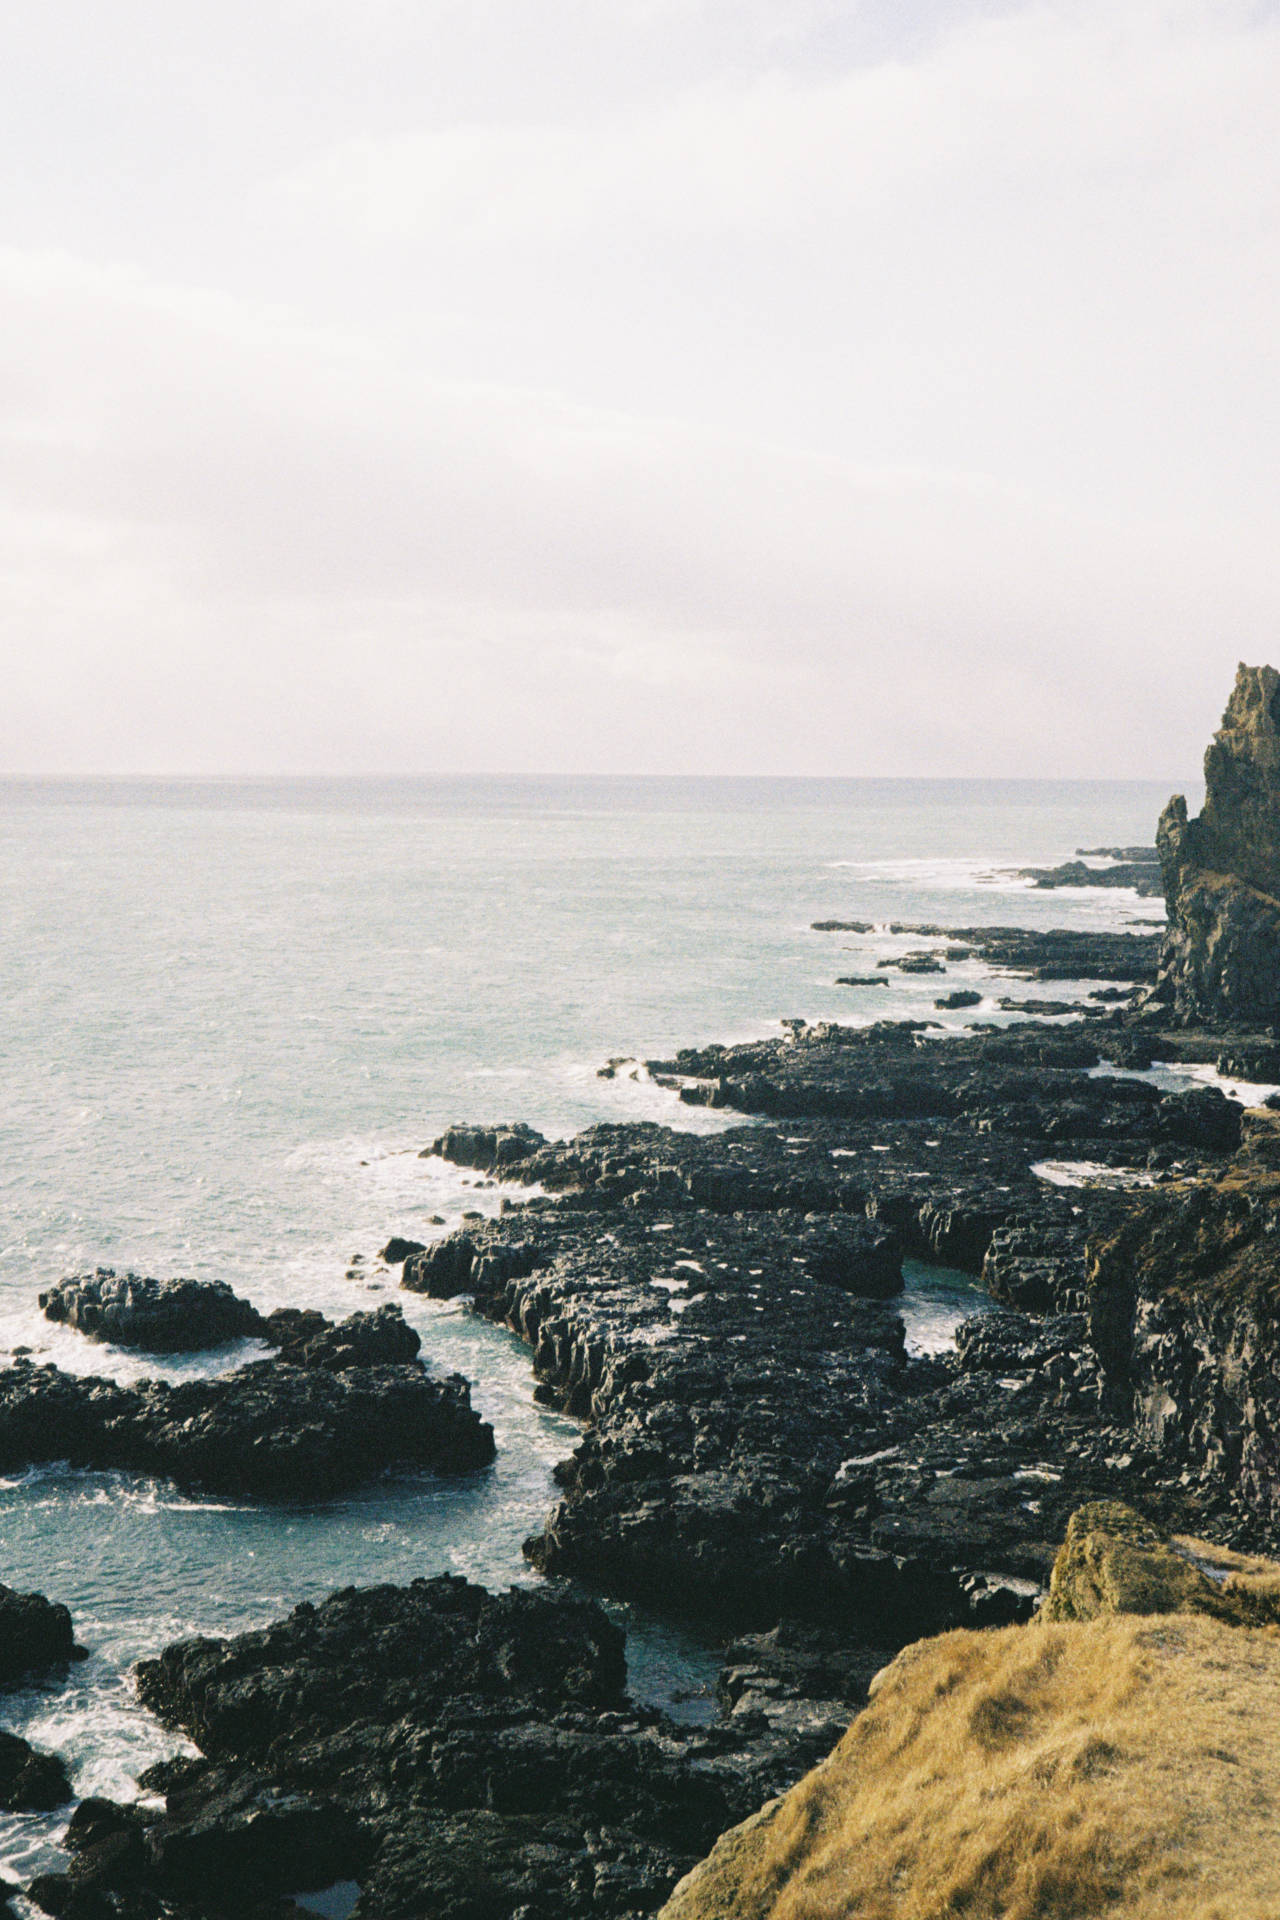 A photograph of some black rocks off the side of a cliff by the sea